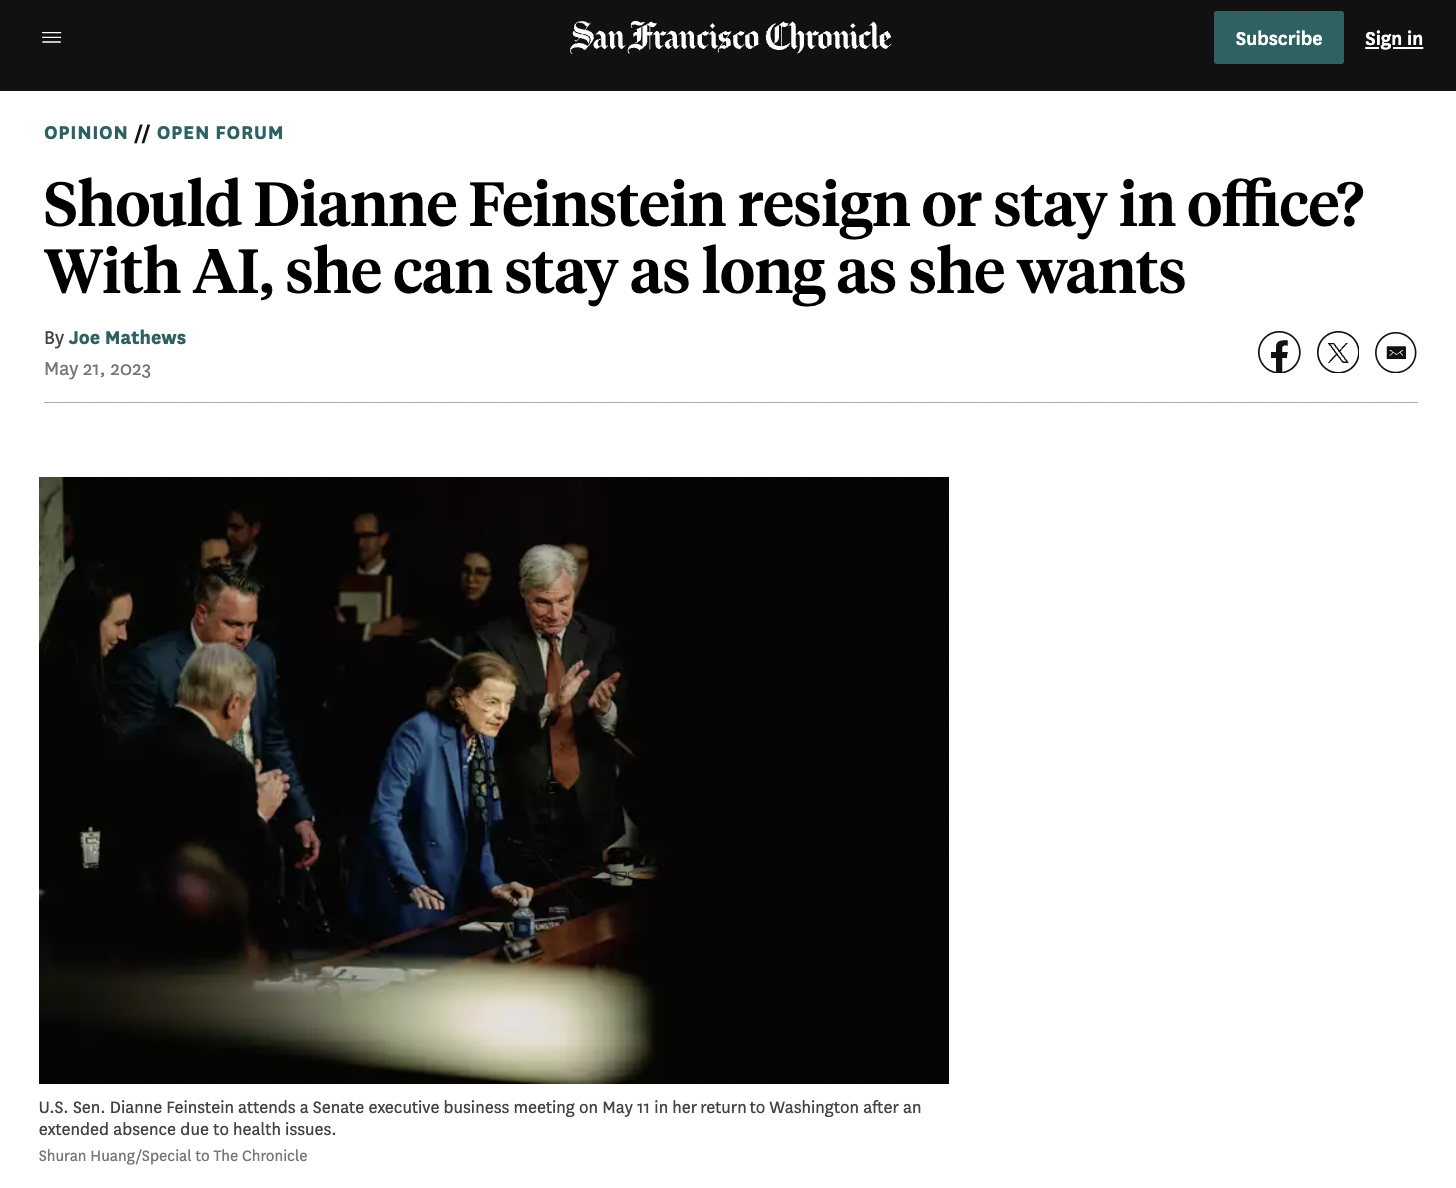 screenshot - San Francisco Chronicle Subscribe Sign in Opinion Open Forum Should Dianne Feinstein resign or stay in office? With Ai, she can stay as long as she wants By Joe Mathews U.S. Sen. Dianne Feinstein attends a Senate executive business meeting on